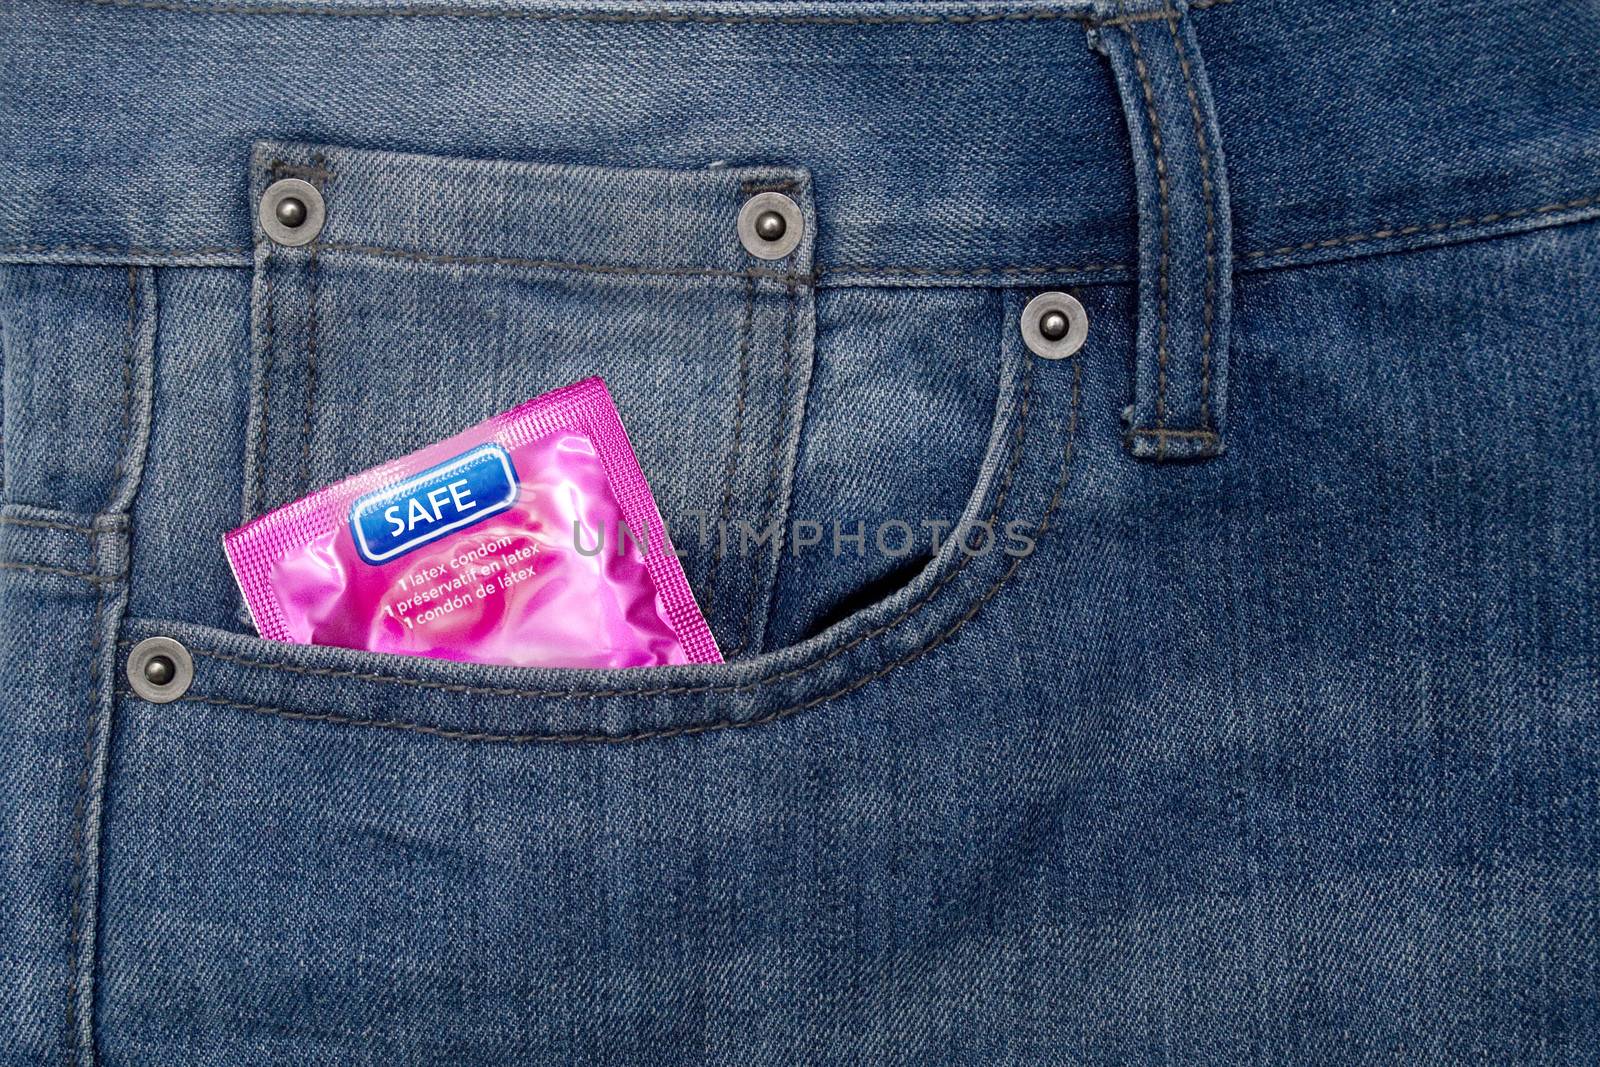 Pink wrapped condom on a demin jean pocket